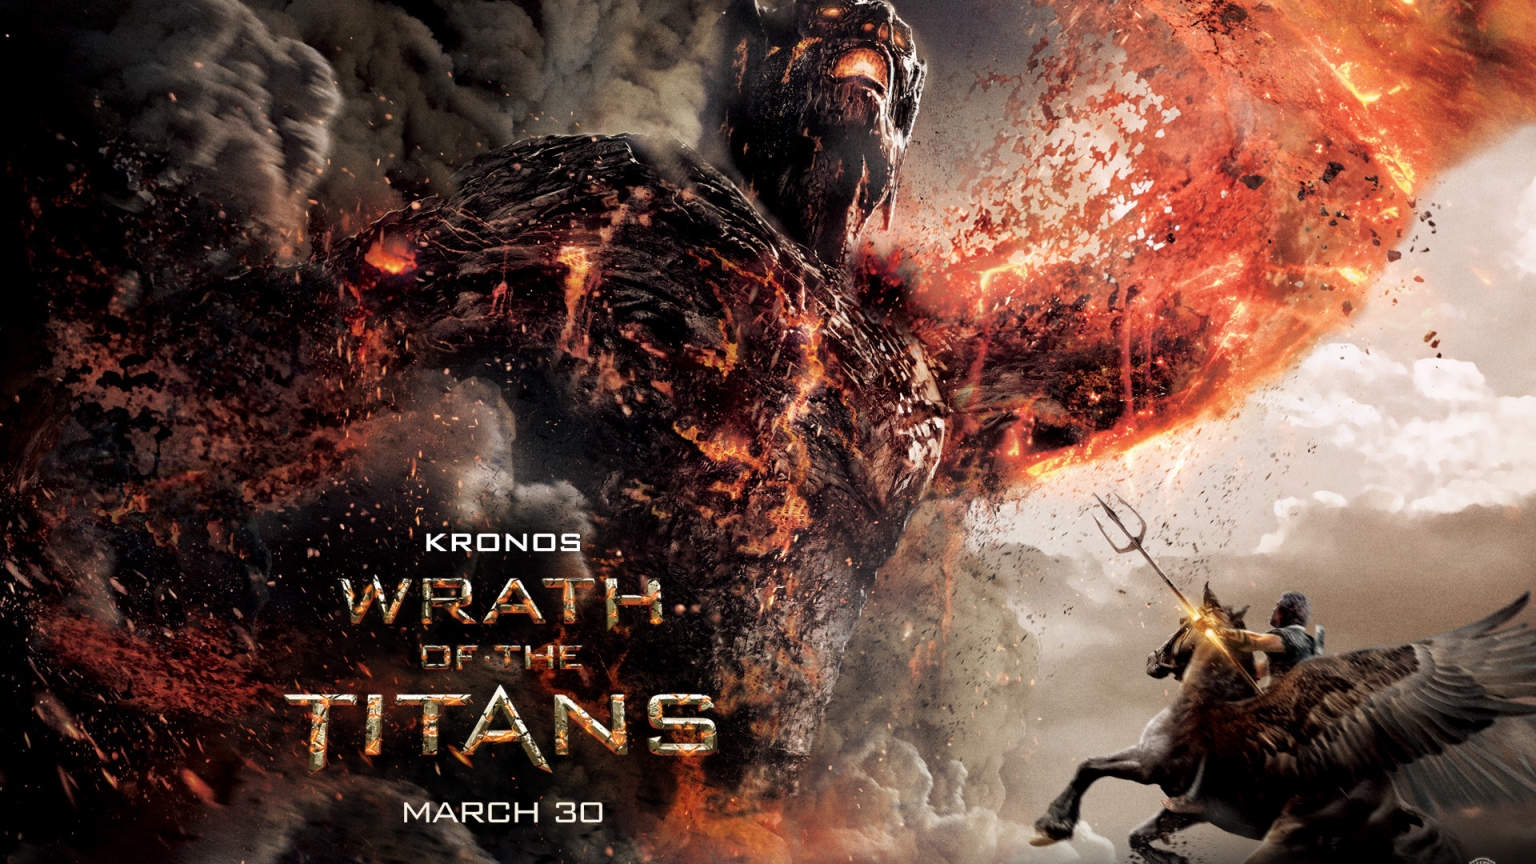 Kronos Wrath of the Titans for 1536 x 864 HDTV resolution